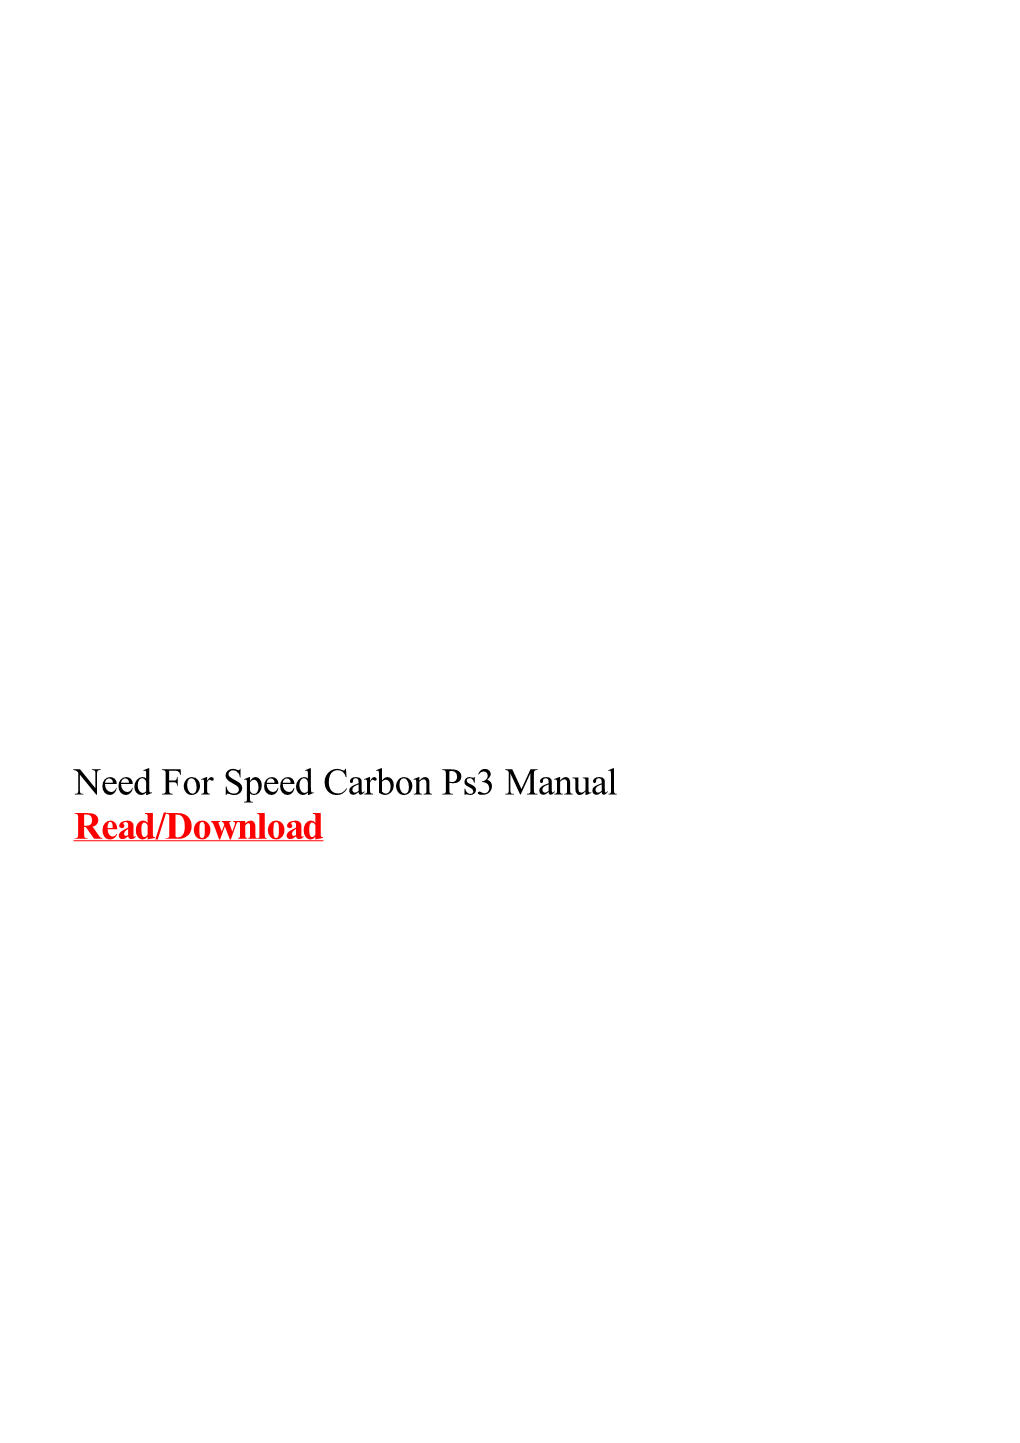 Need for Speed Carbon Ps3 Manual